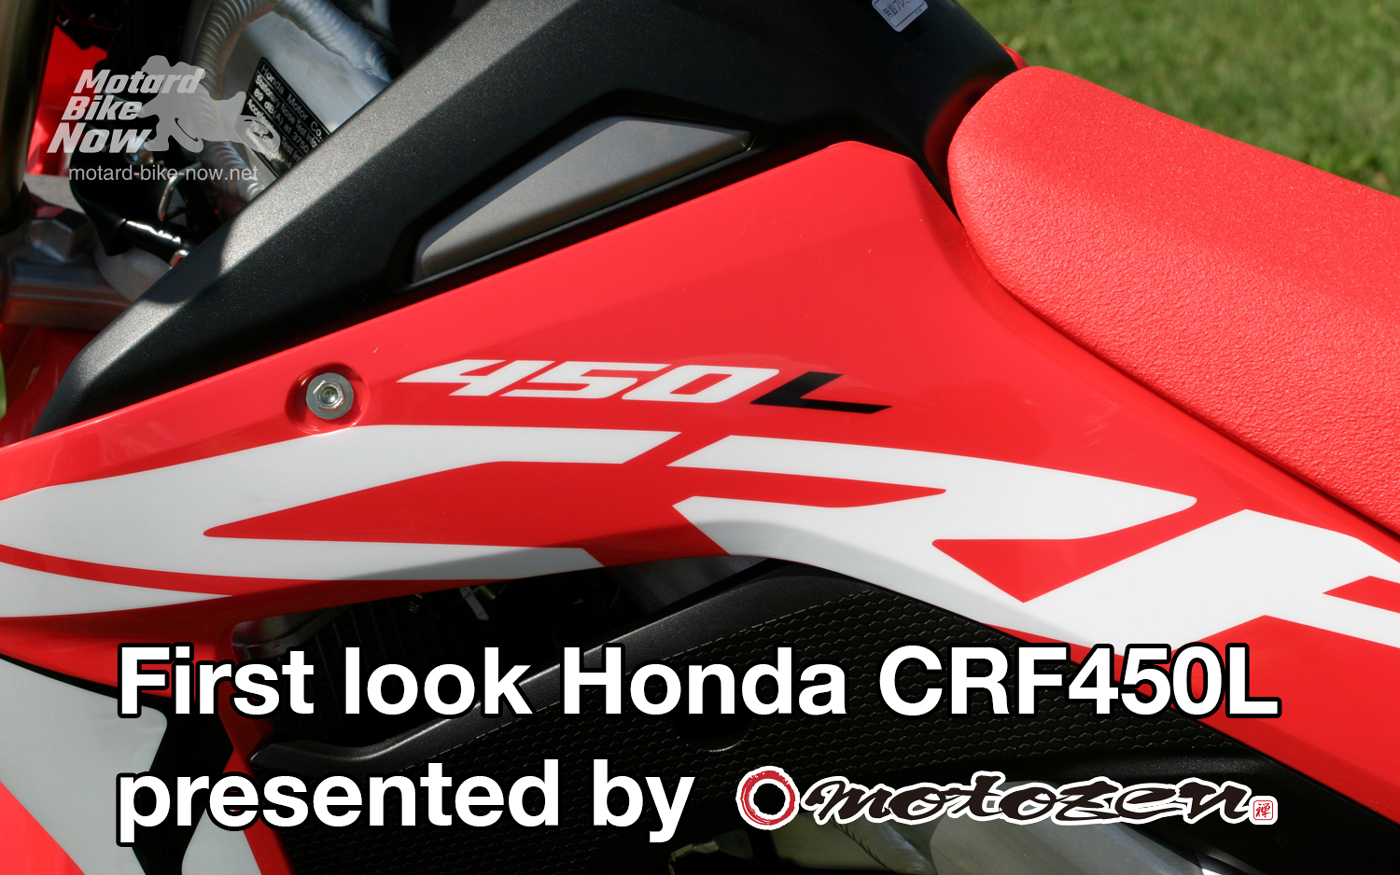 first look honda CRF450L presented by motozen